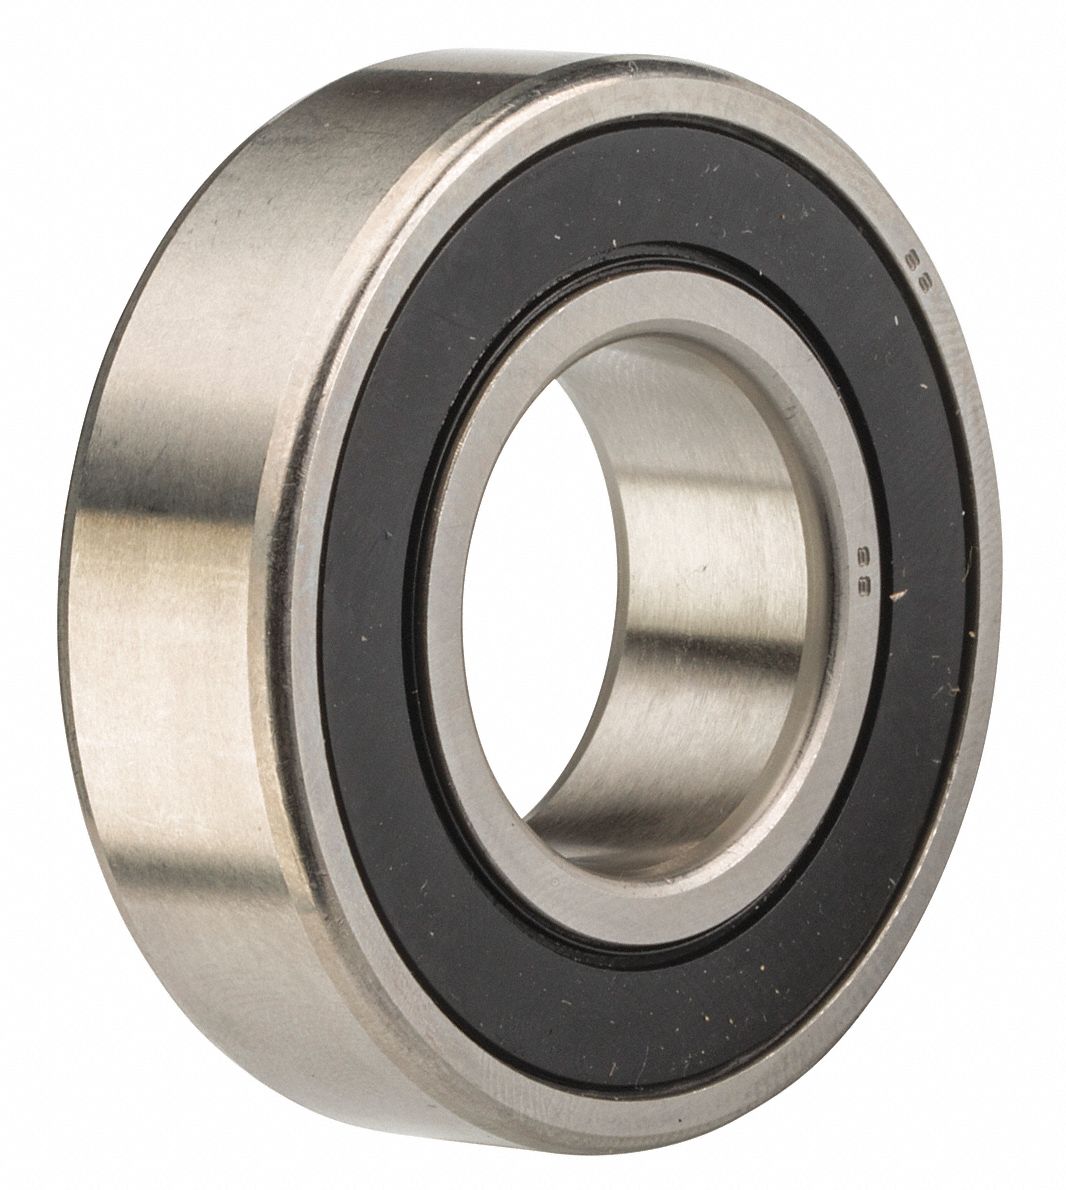 Radial Ball Bearing: 30 mm Bore Dia., 55 mm Outside Dia., 13 mm Wd, Double Sealed